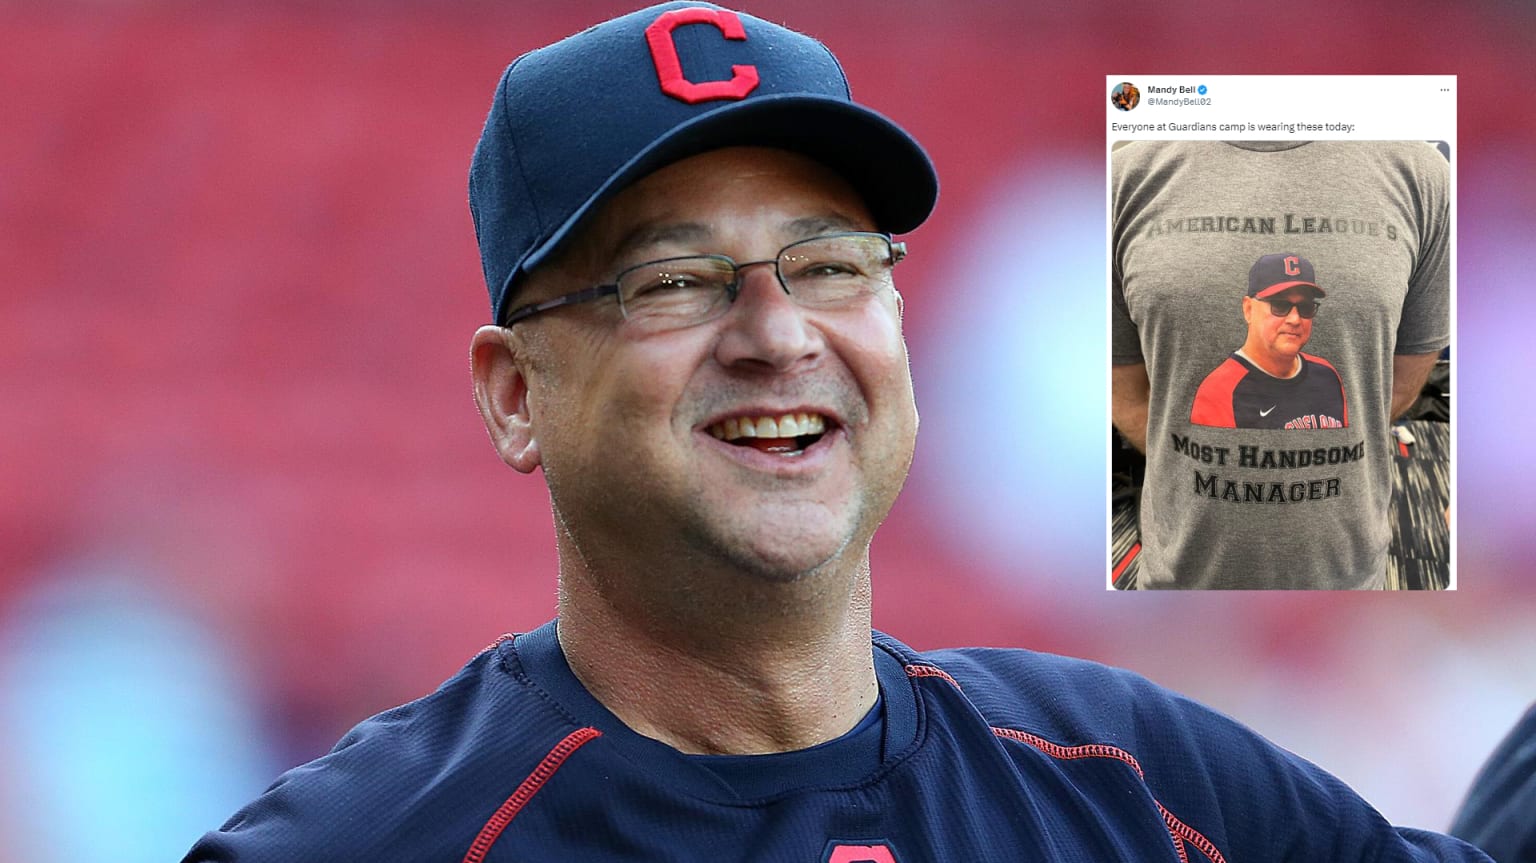 Terry Francona is pictured with an inset showing a shirt with his picture and the words ''Most Handsome Manager''